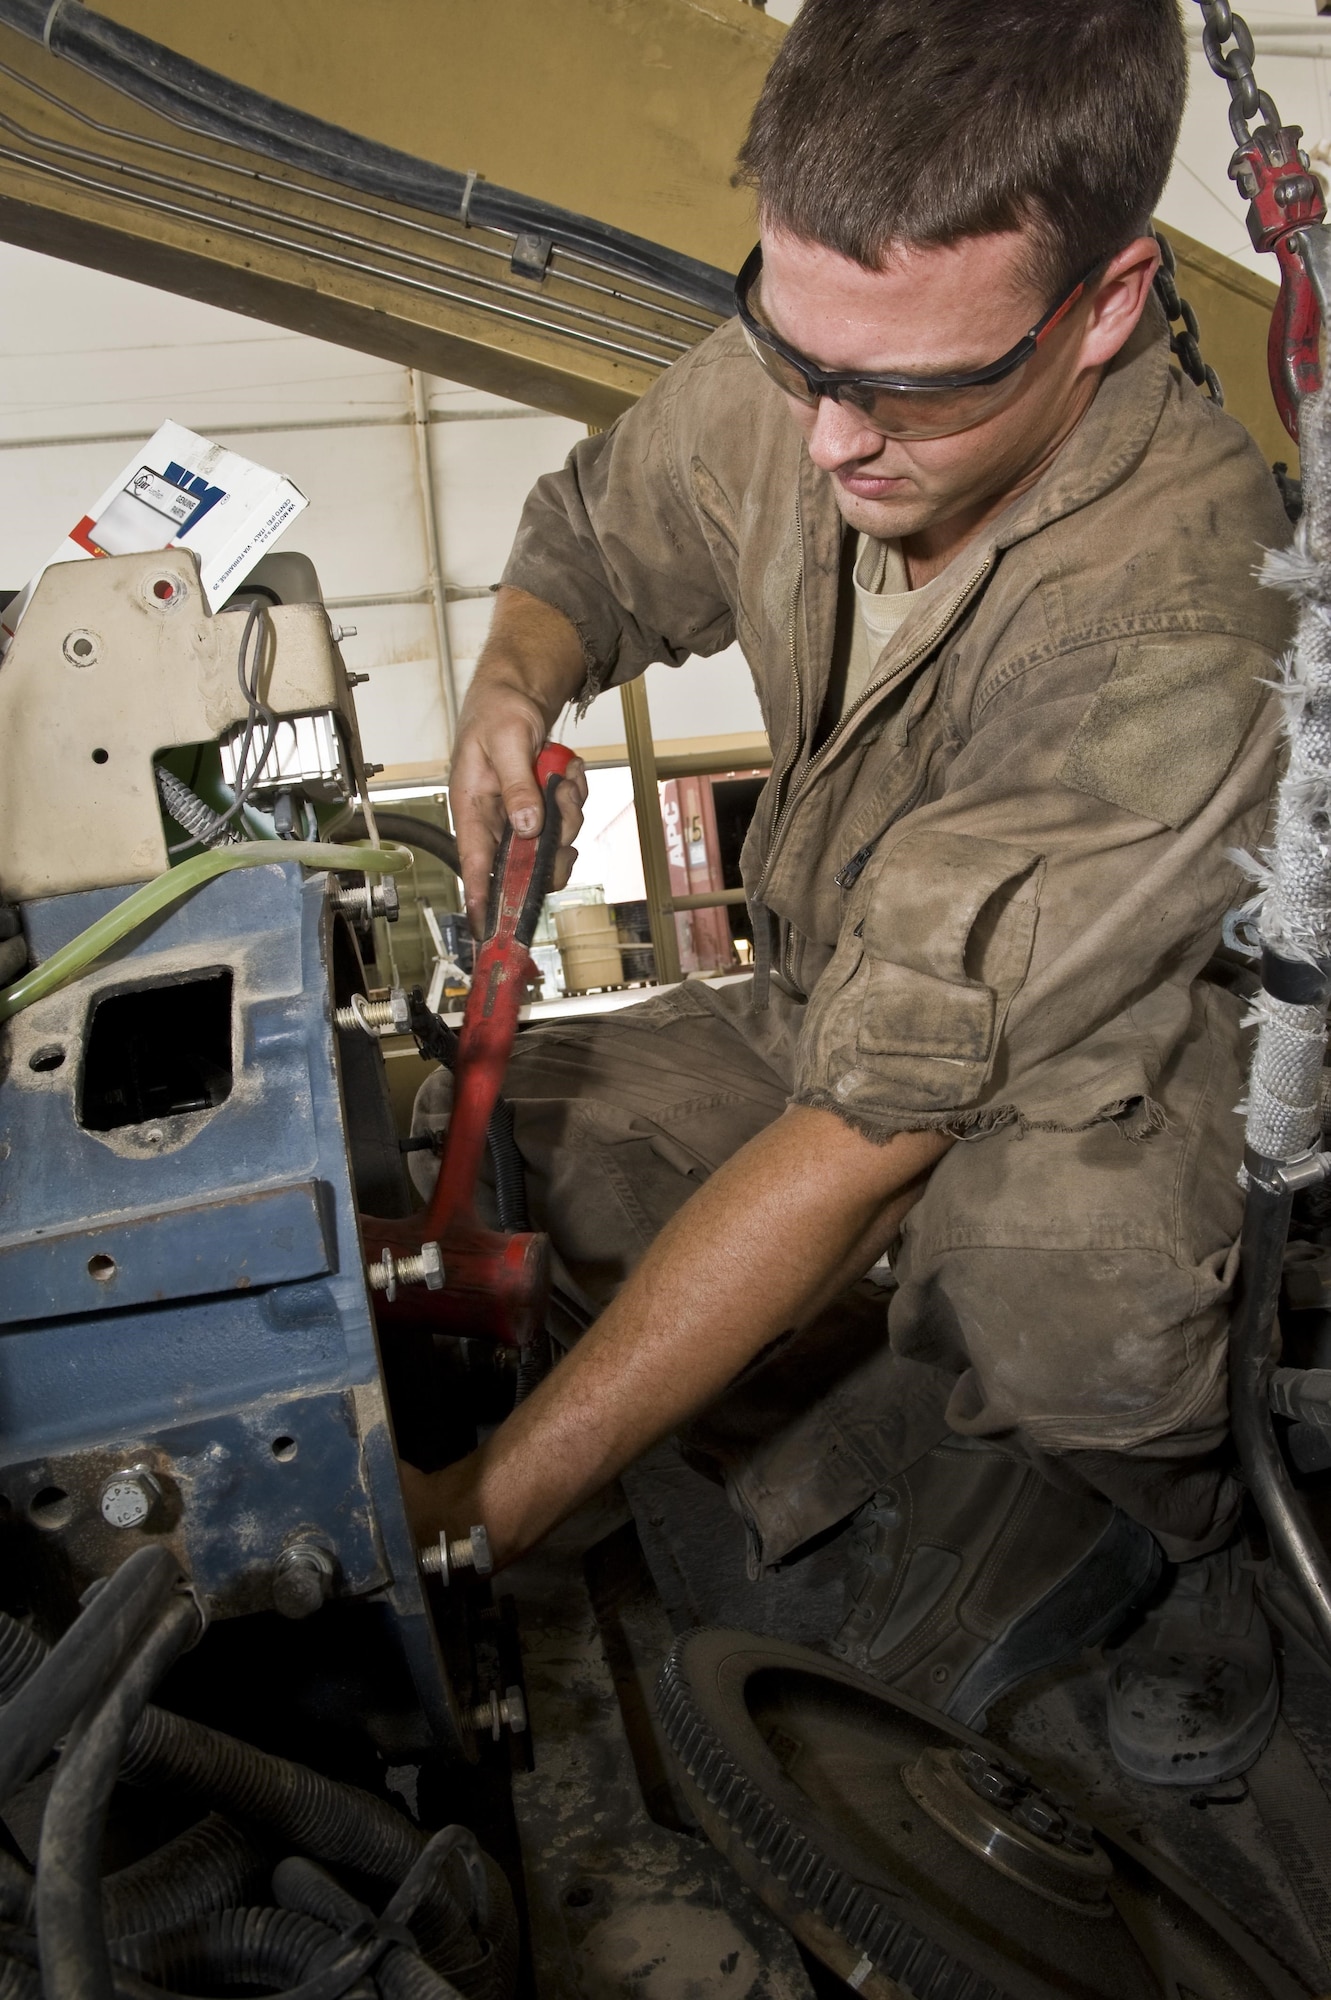 Airman 1st Class Tyler Jones performs routine maintenance on an aircraft cargo loader July 31, 2013, at the 379th Air Expeditionary Wing in Southwest Asia. Jones is a 379th Expeditionary Logistics Readiness Squadron vehicle mechanic deployed from Eielson Air Force Base, Alaska.